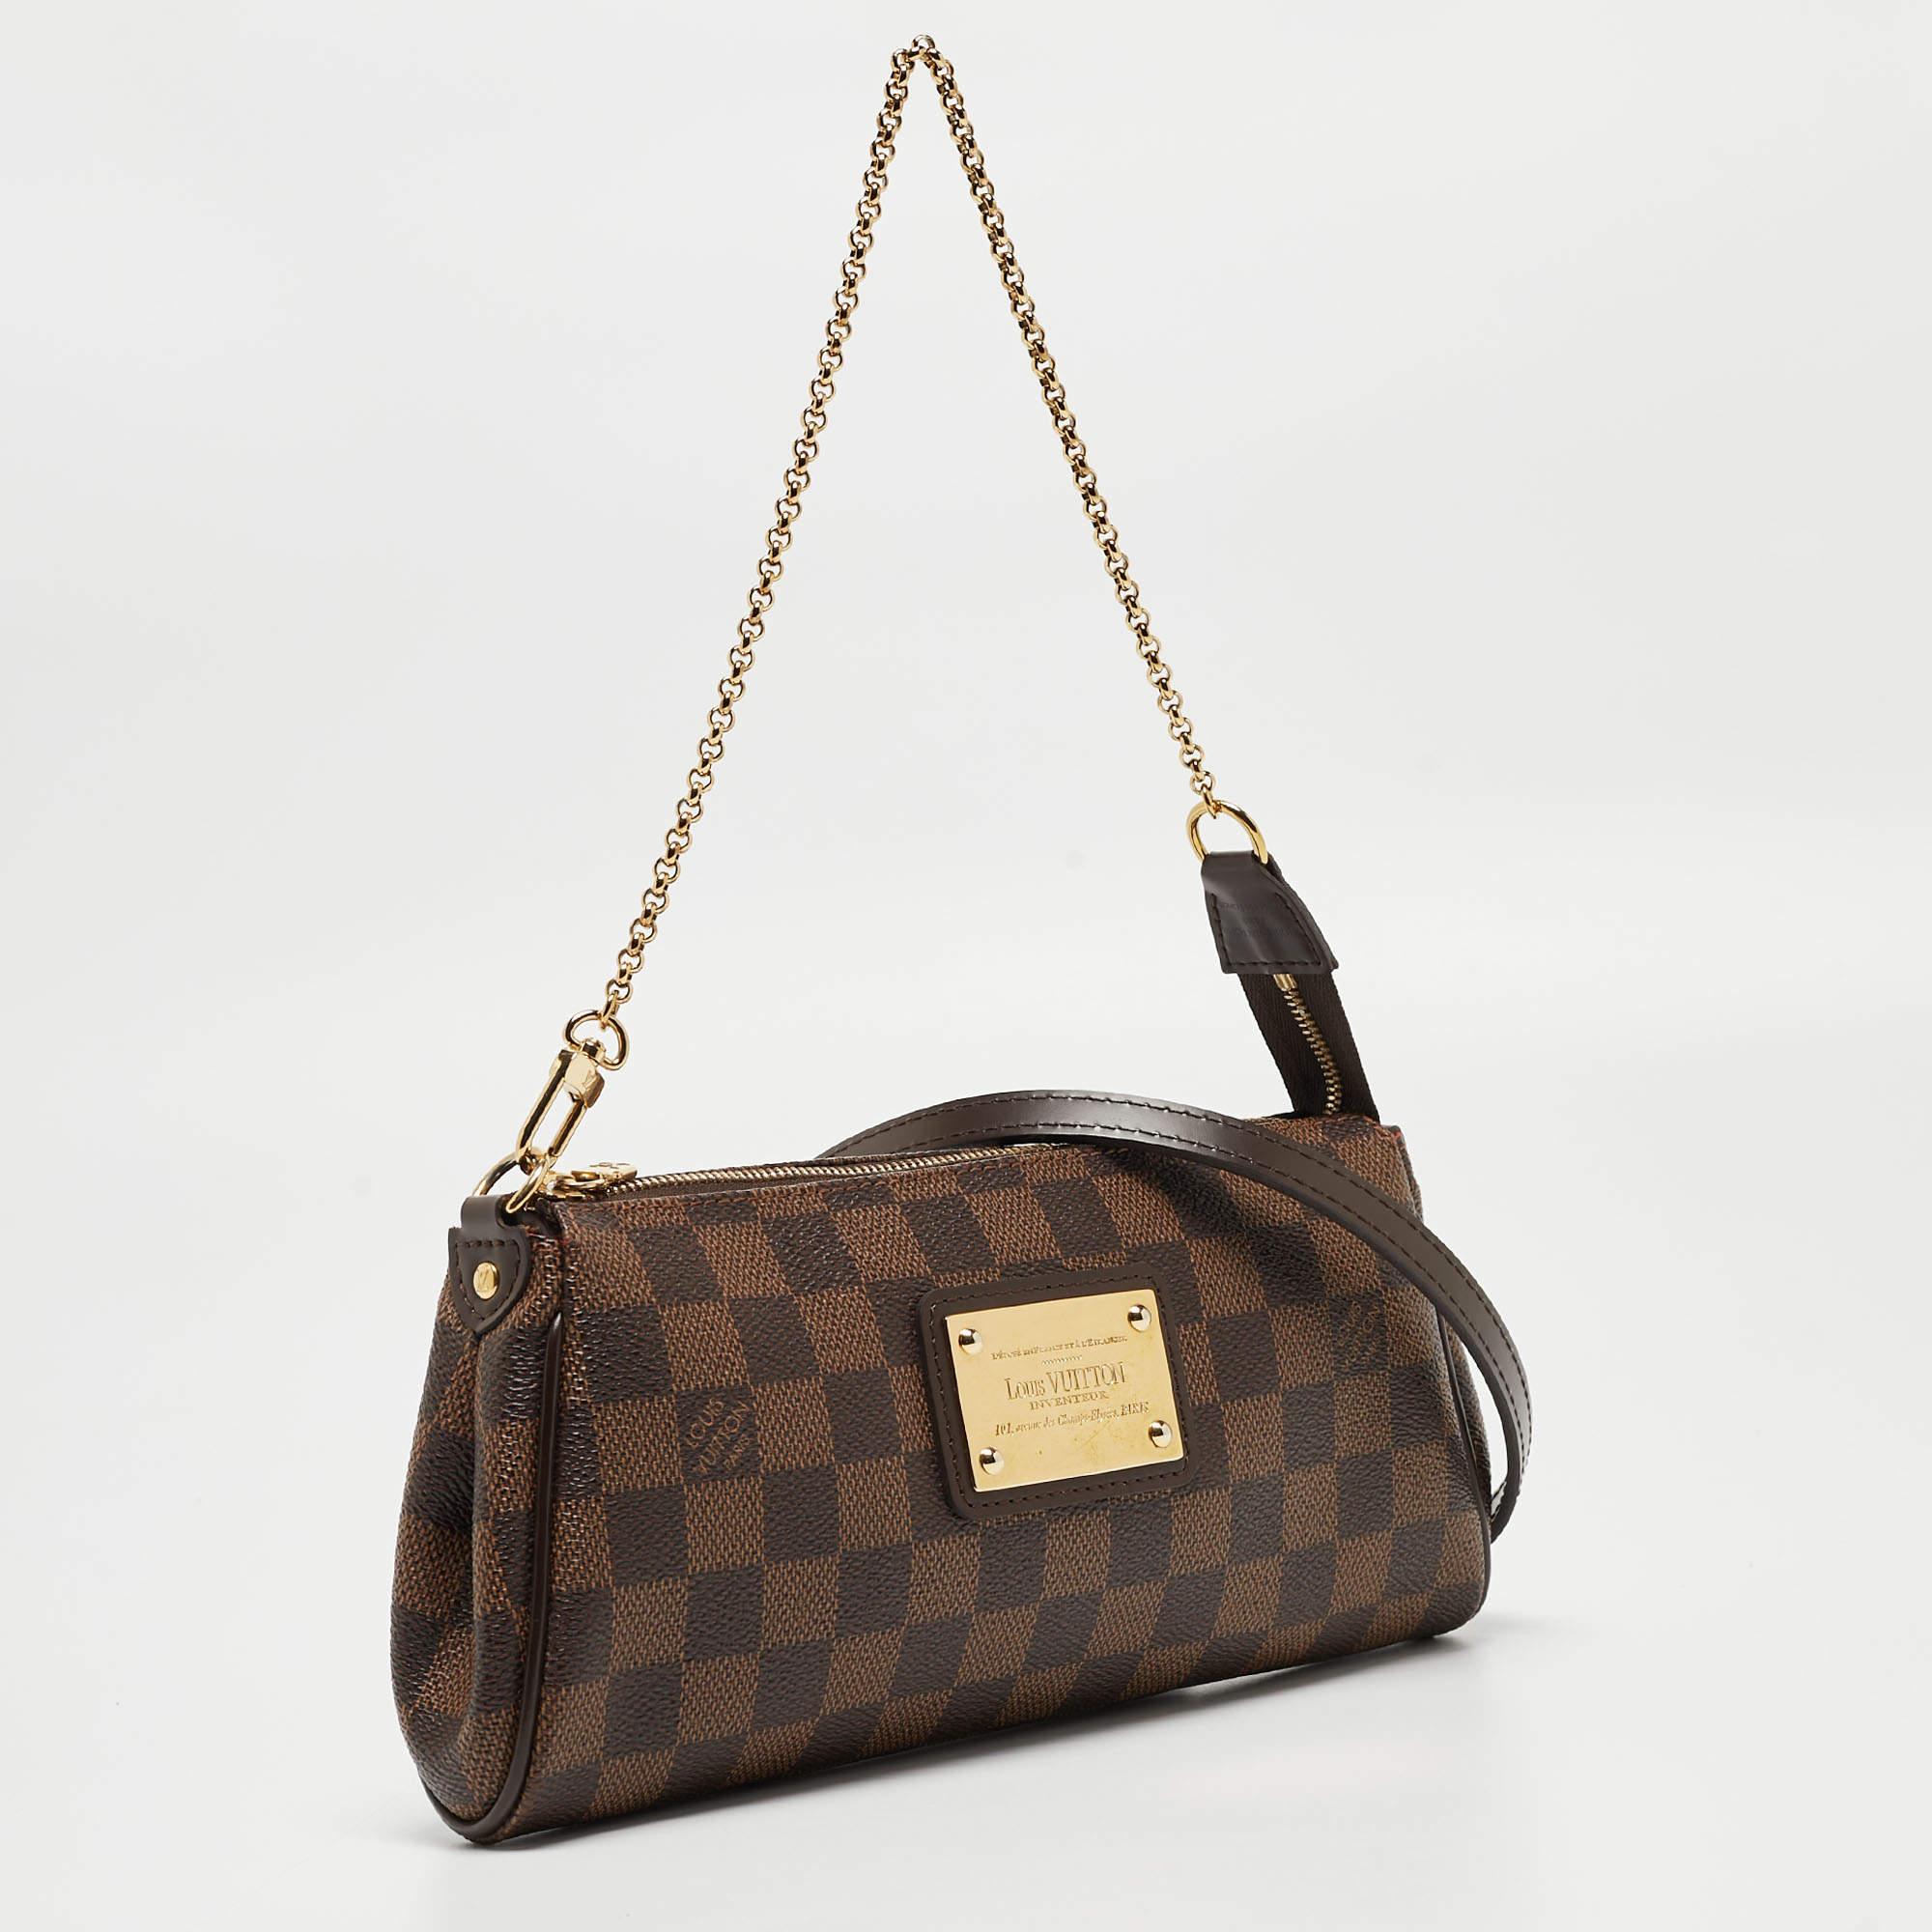 Crafted from Damier Ebene canvas, this Eva Pochette bag is a creation by Louis Vuitton. The bag features a well-sized canvas interior that is secured by a gold-tone zipper. It comes with a chain and a leather strap.

